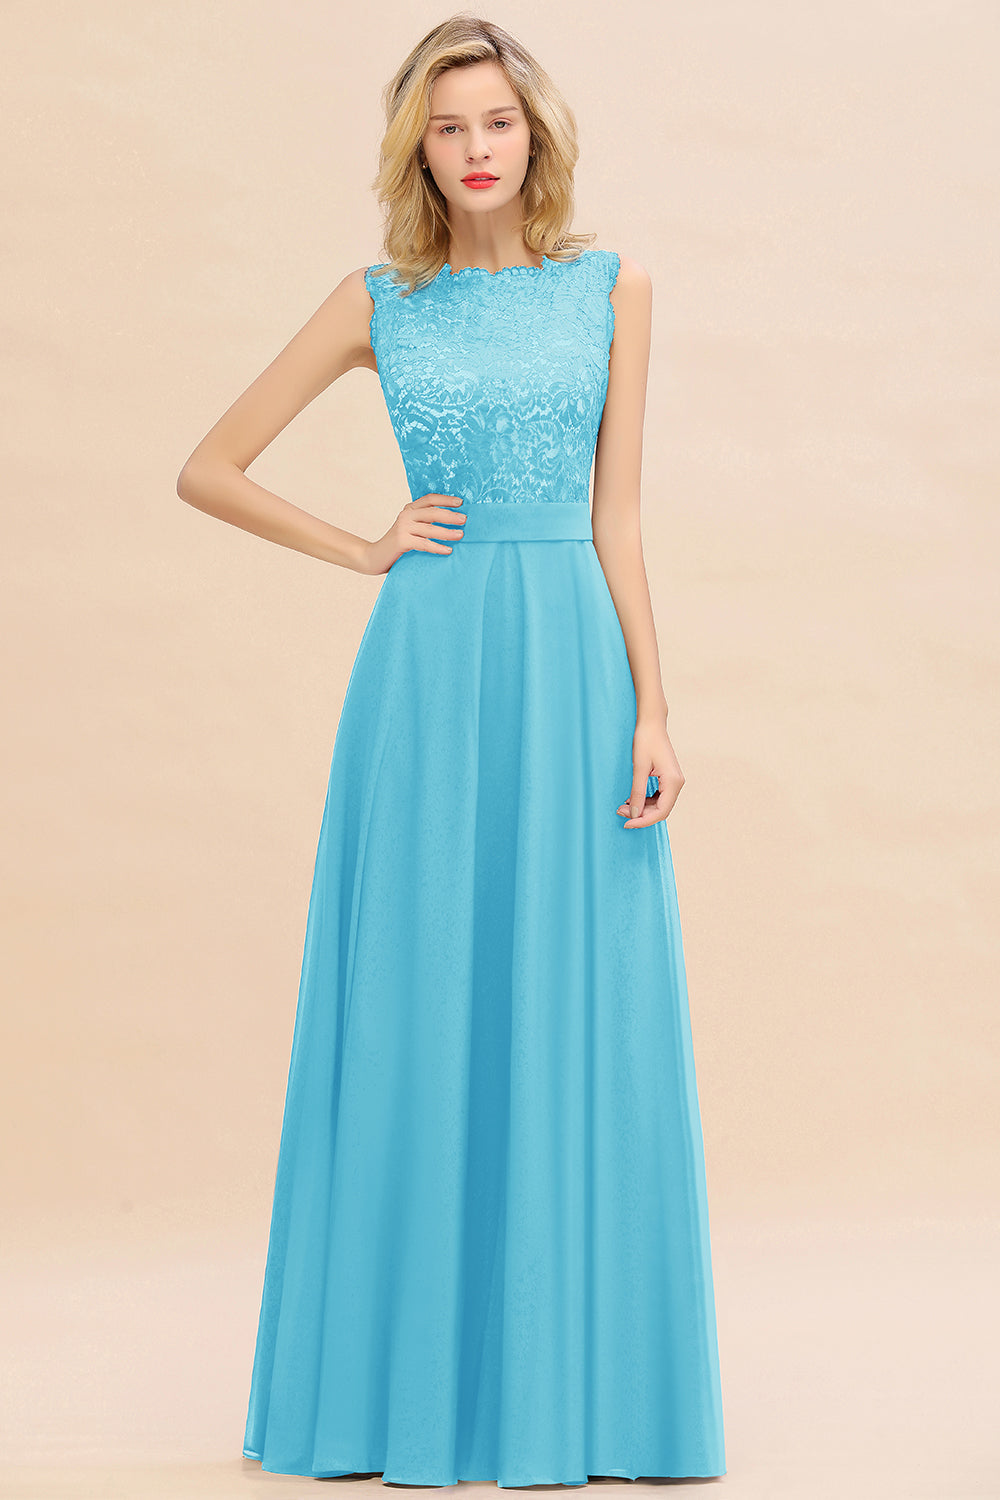 Exquisite Scoop Chiffon Lace Bridesmaid Dresses with V-Back-27dress